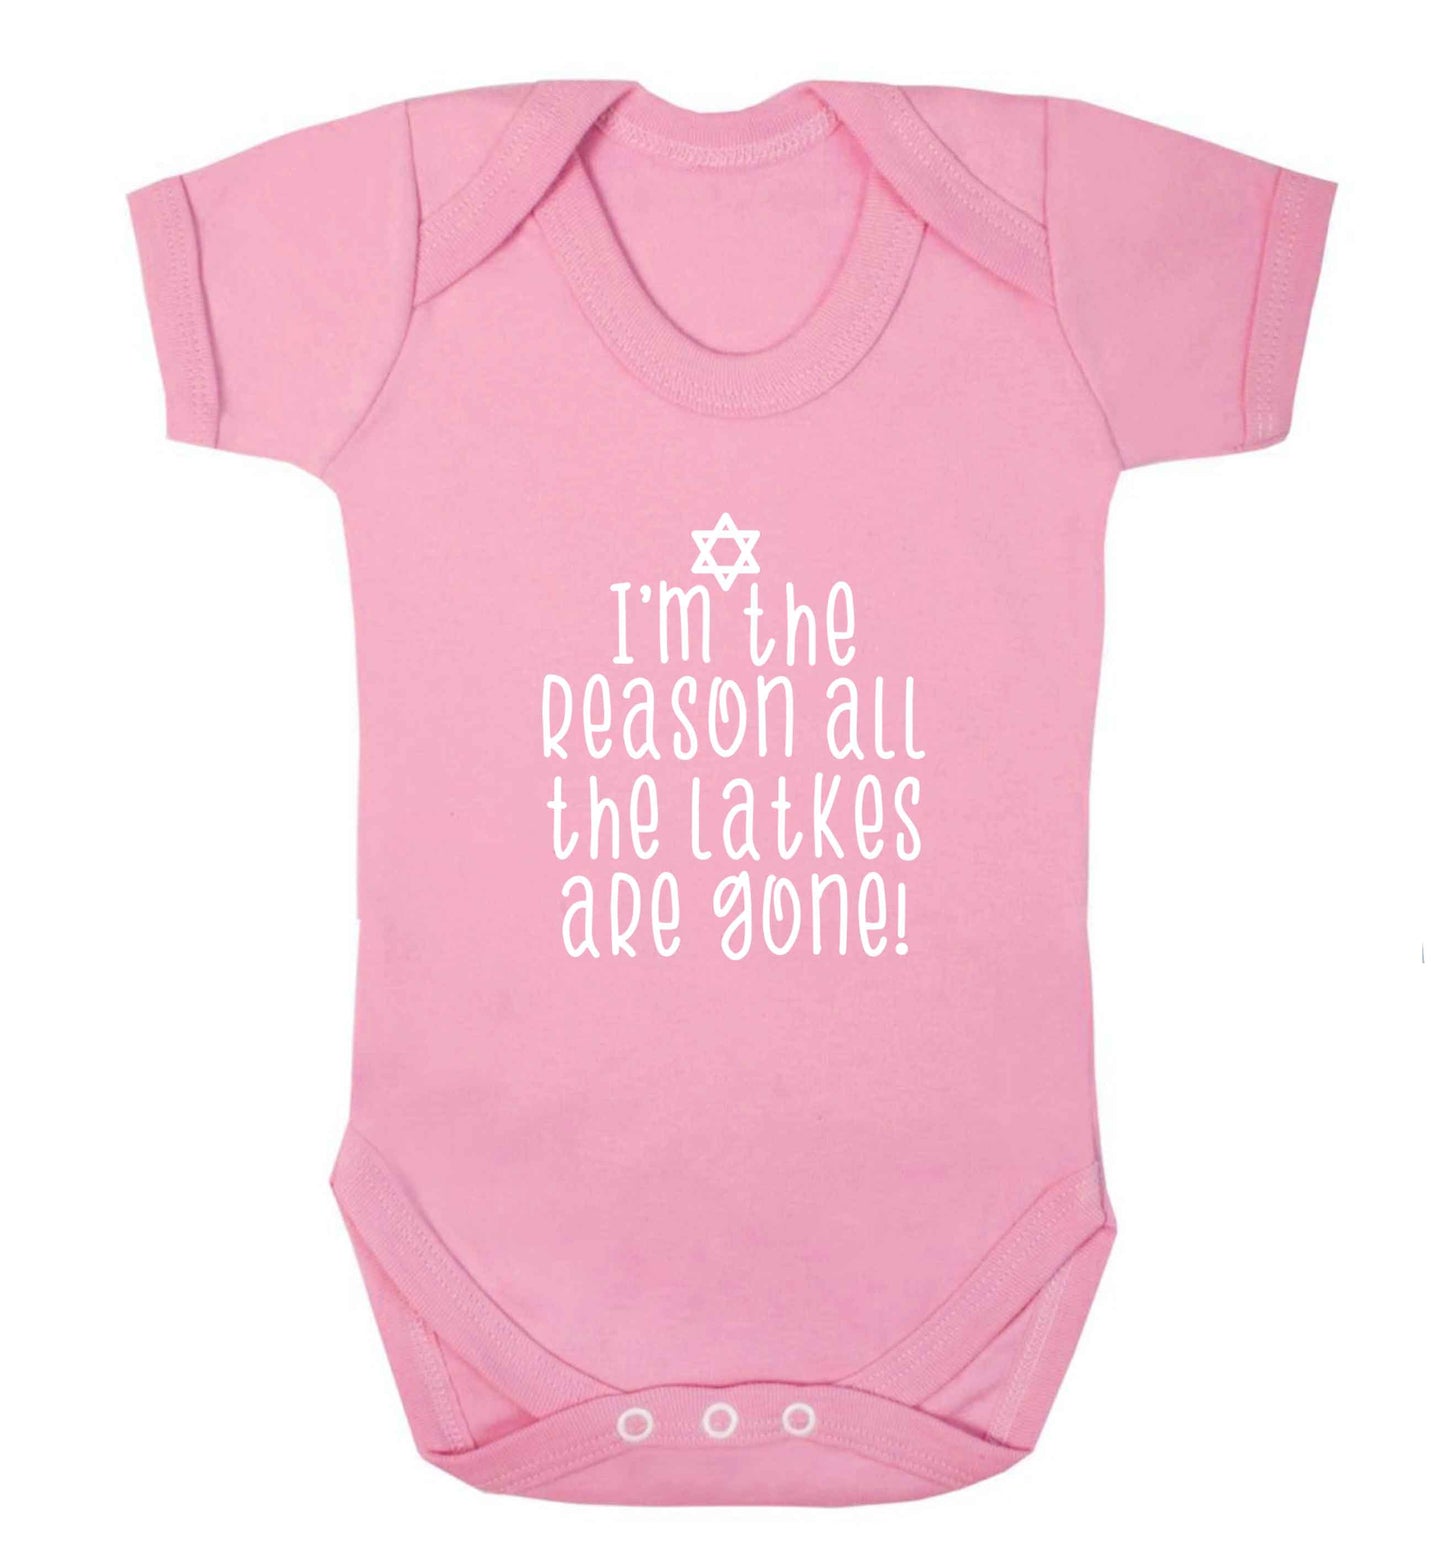 I'm the reason all the latkes are gone baby vest pale pink 18-24 months